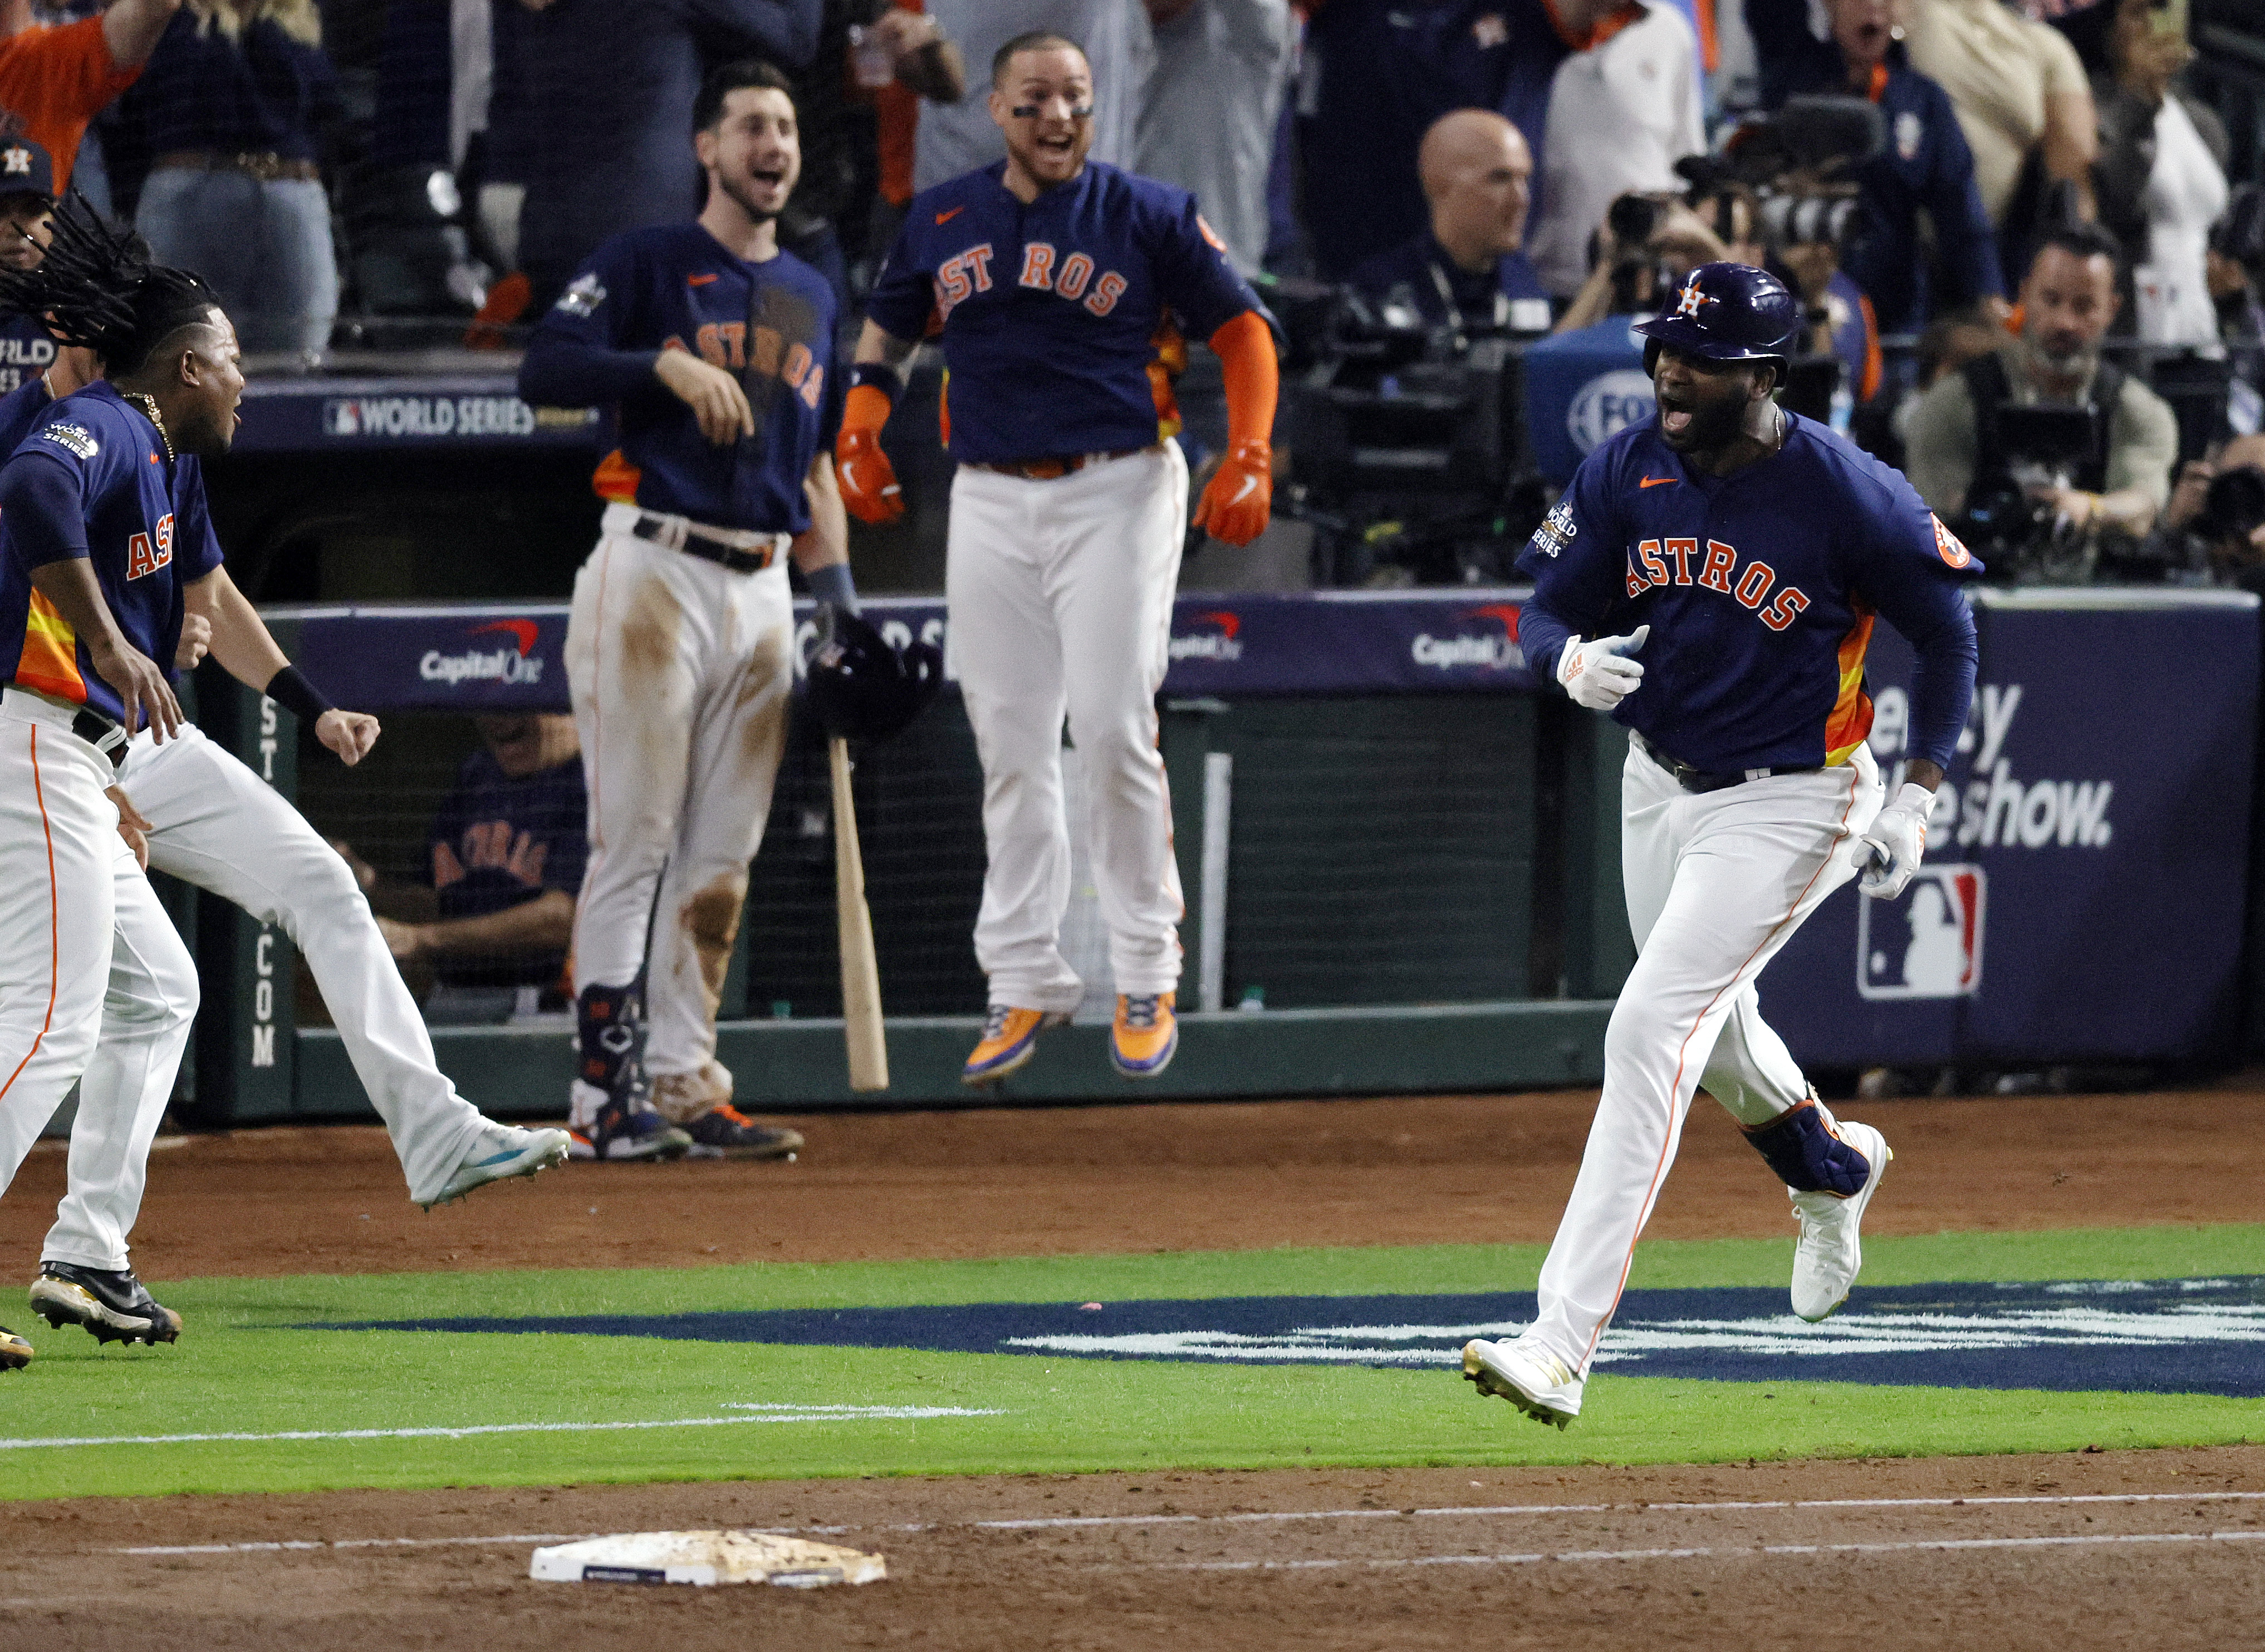 WORLD SERIES CHAMPS: Astros are World Champions after defeating the  Phillies in Game 6 at Minute Maid Park